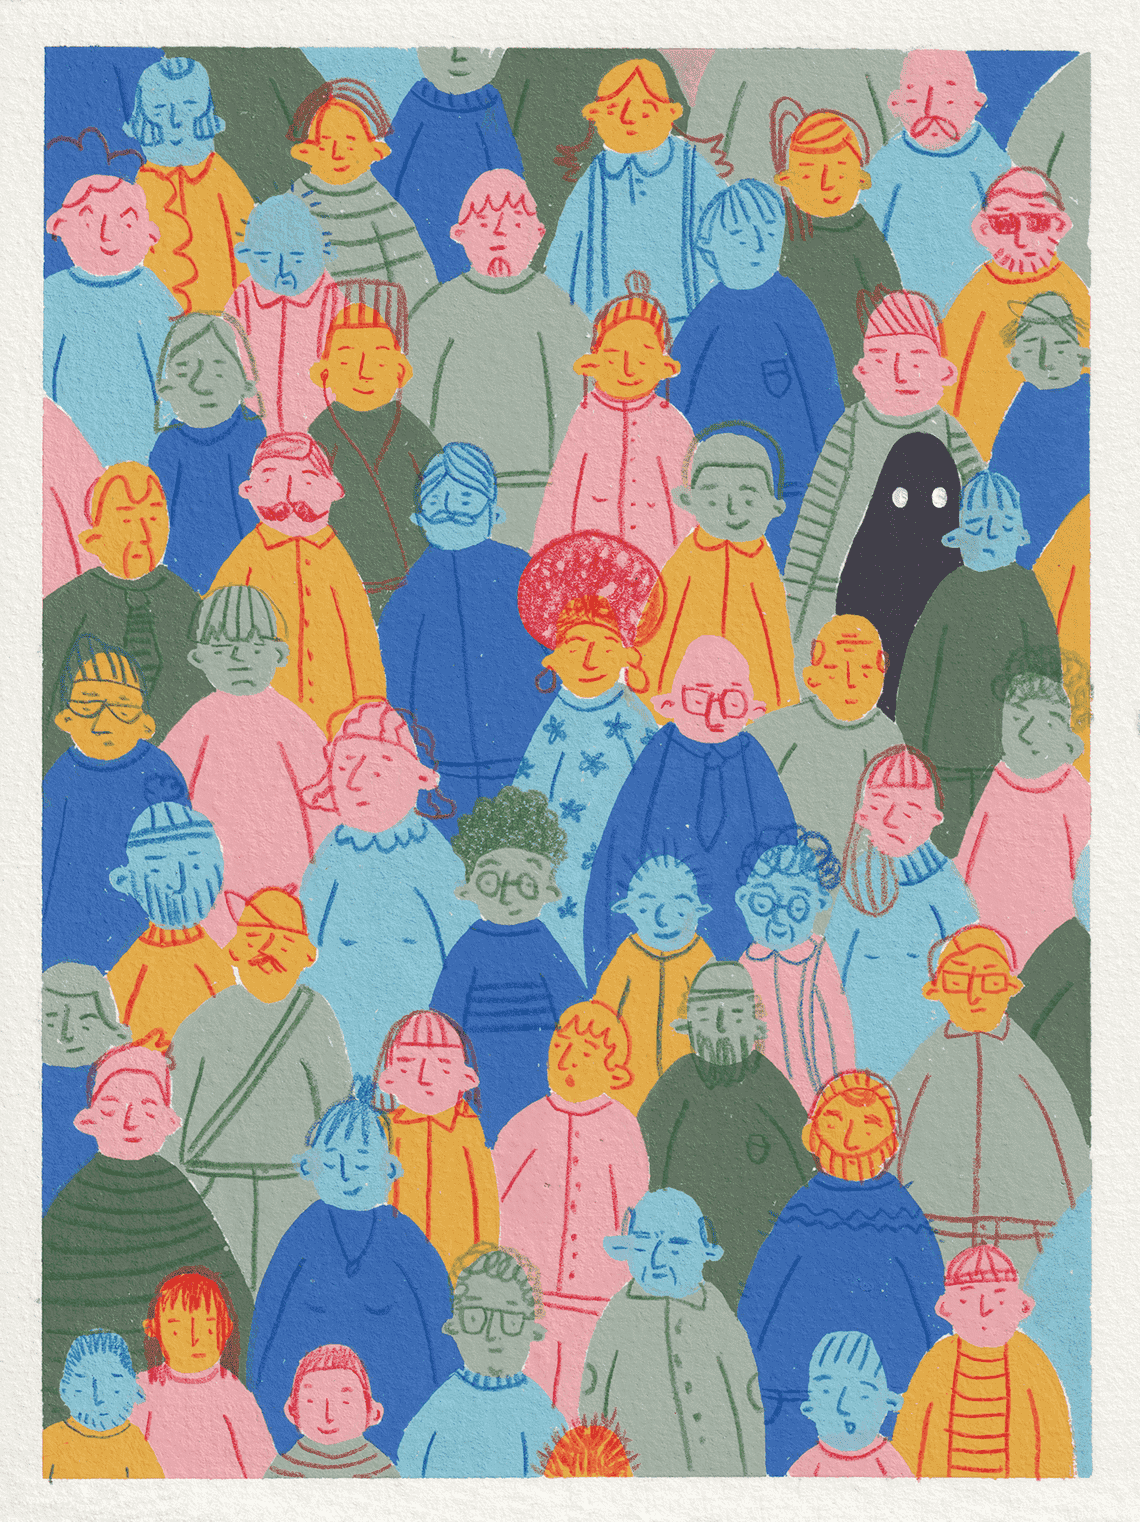 Gouache illustration of a shadow figure in the middle of a colorful crowd.